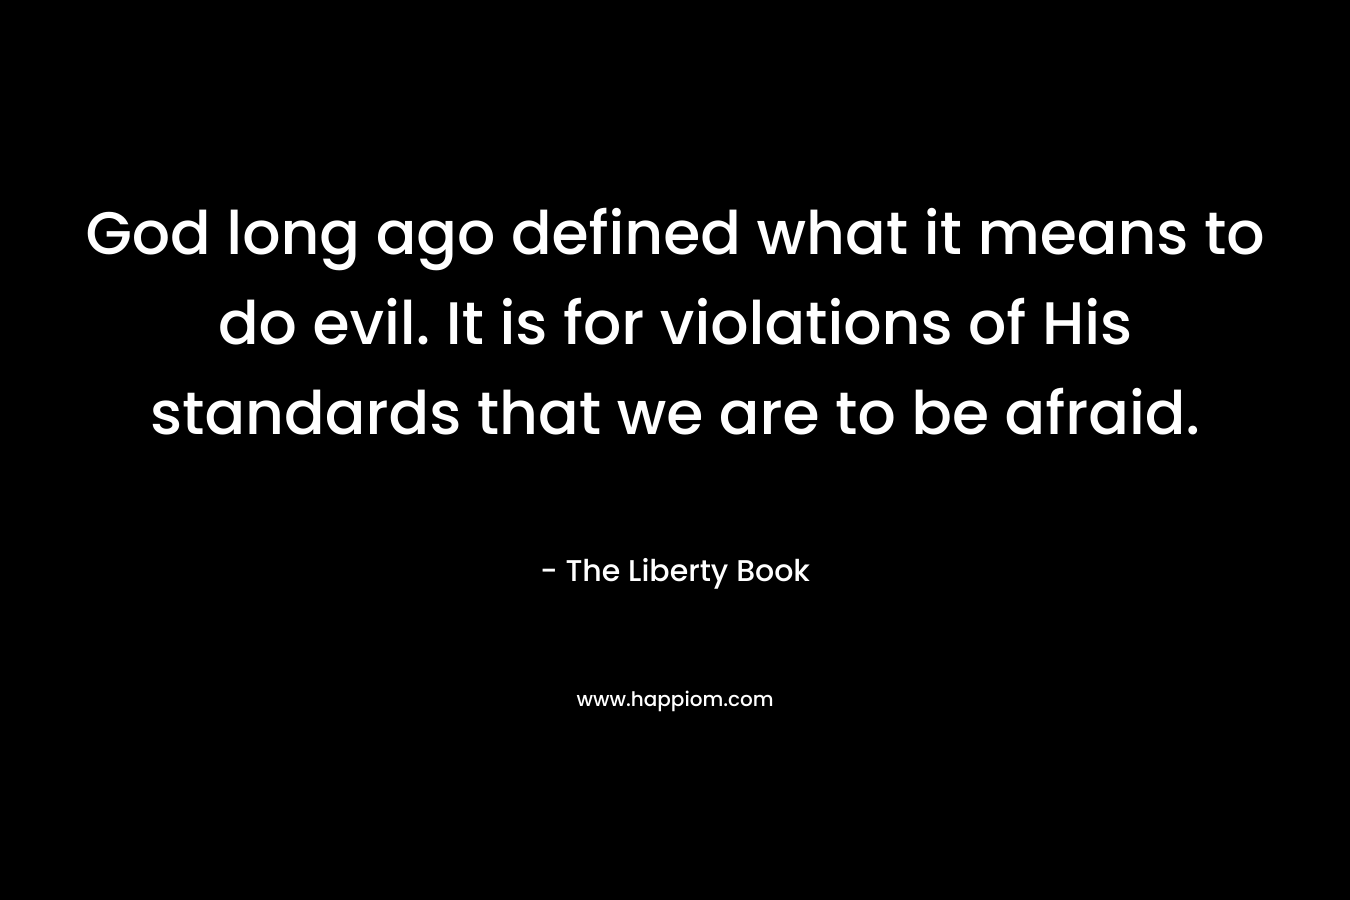 God long ago defined what it means to do evil. It is for violations of His standards that we are to be afraid.